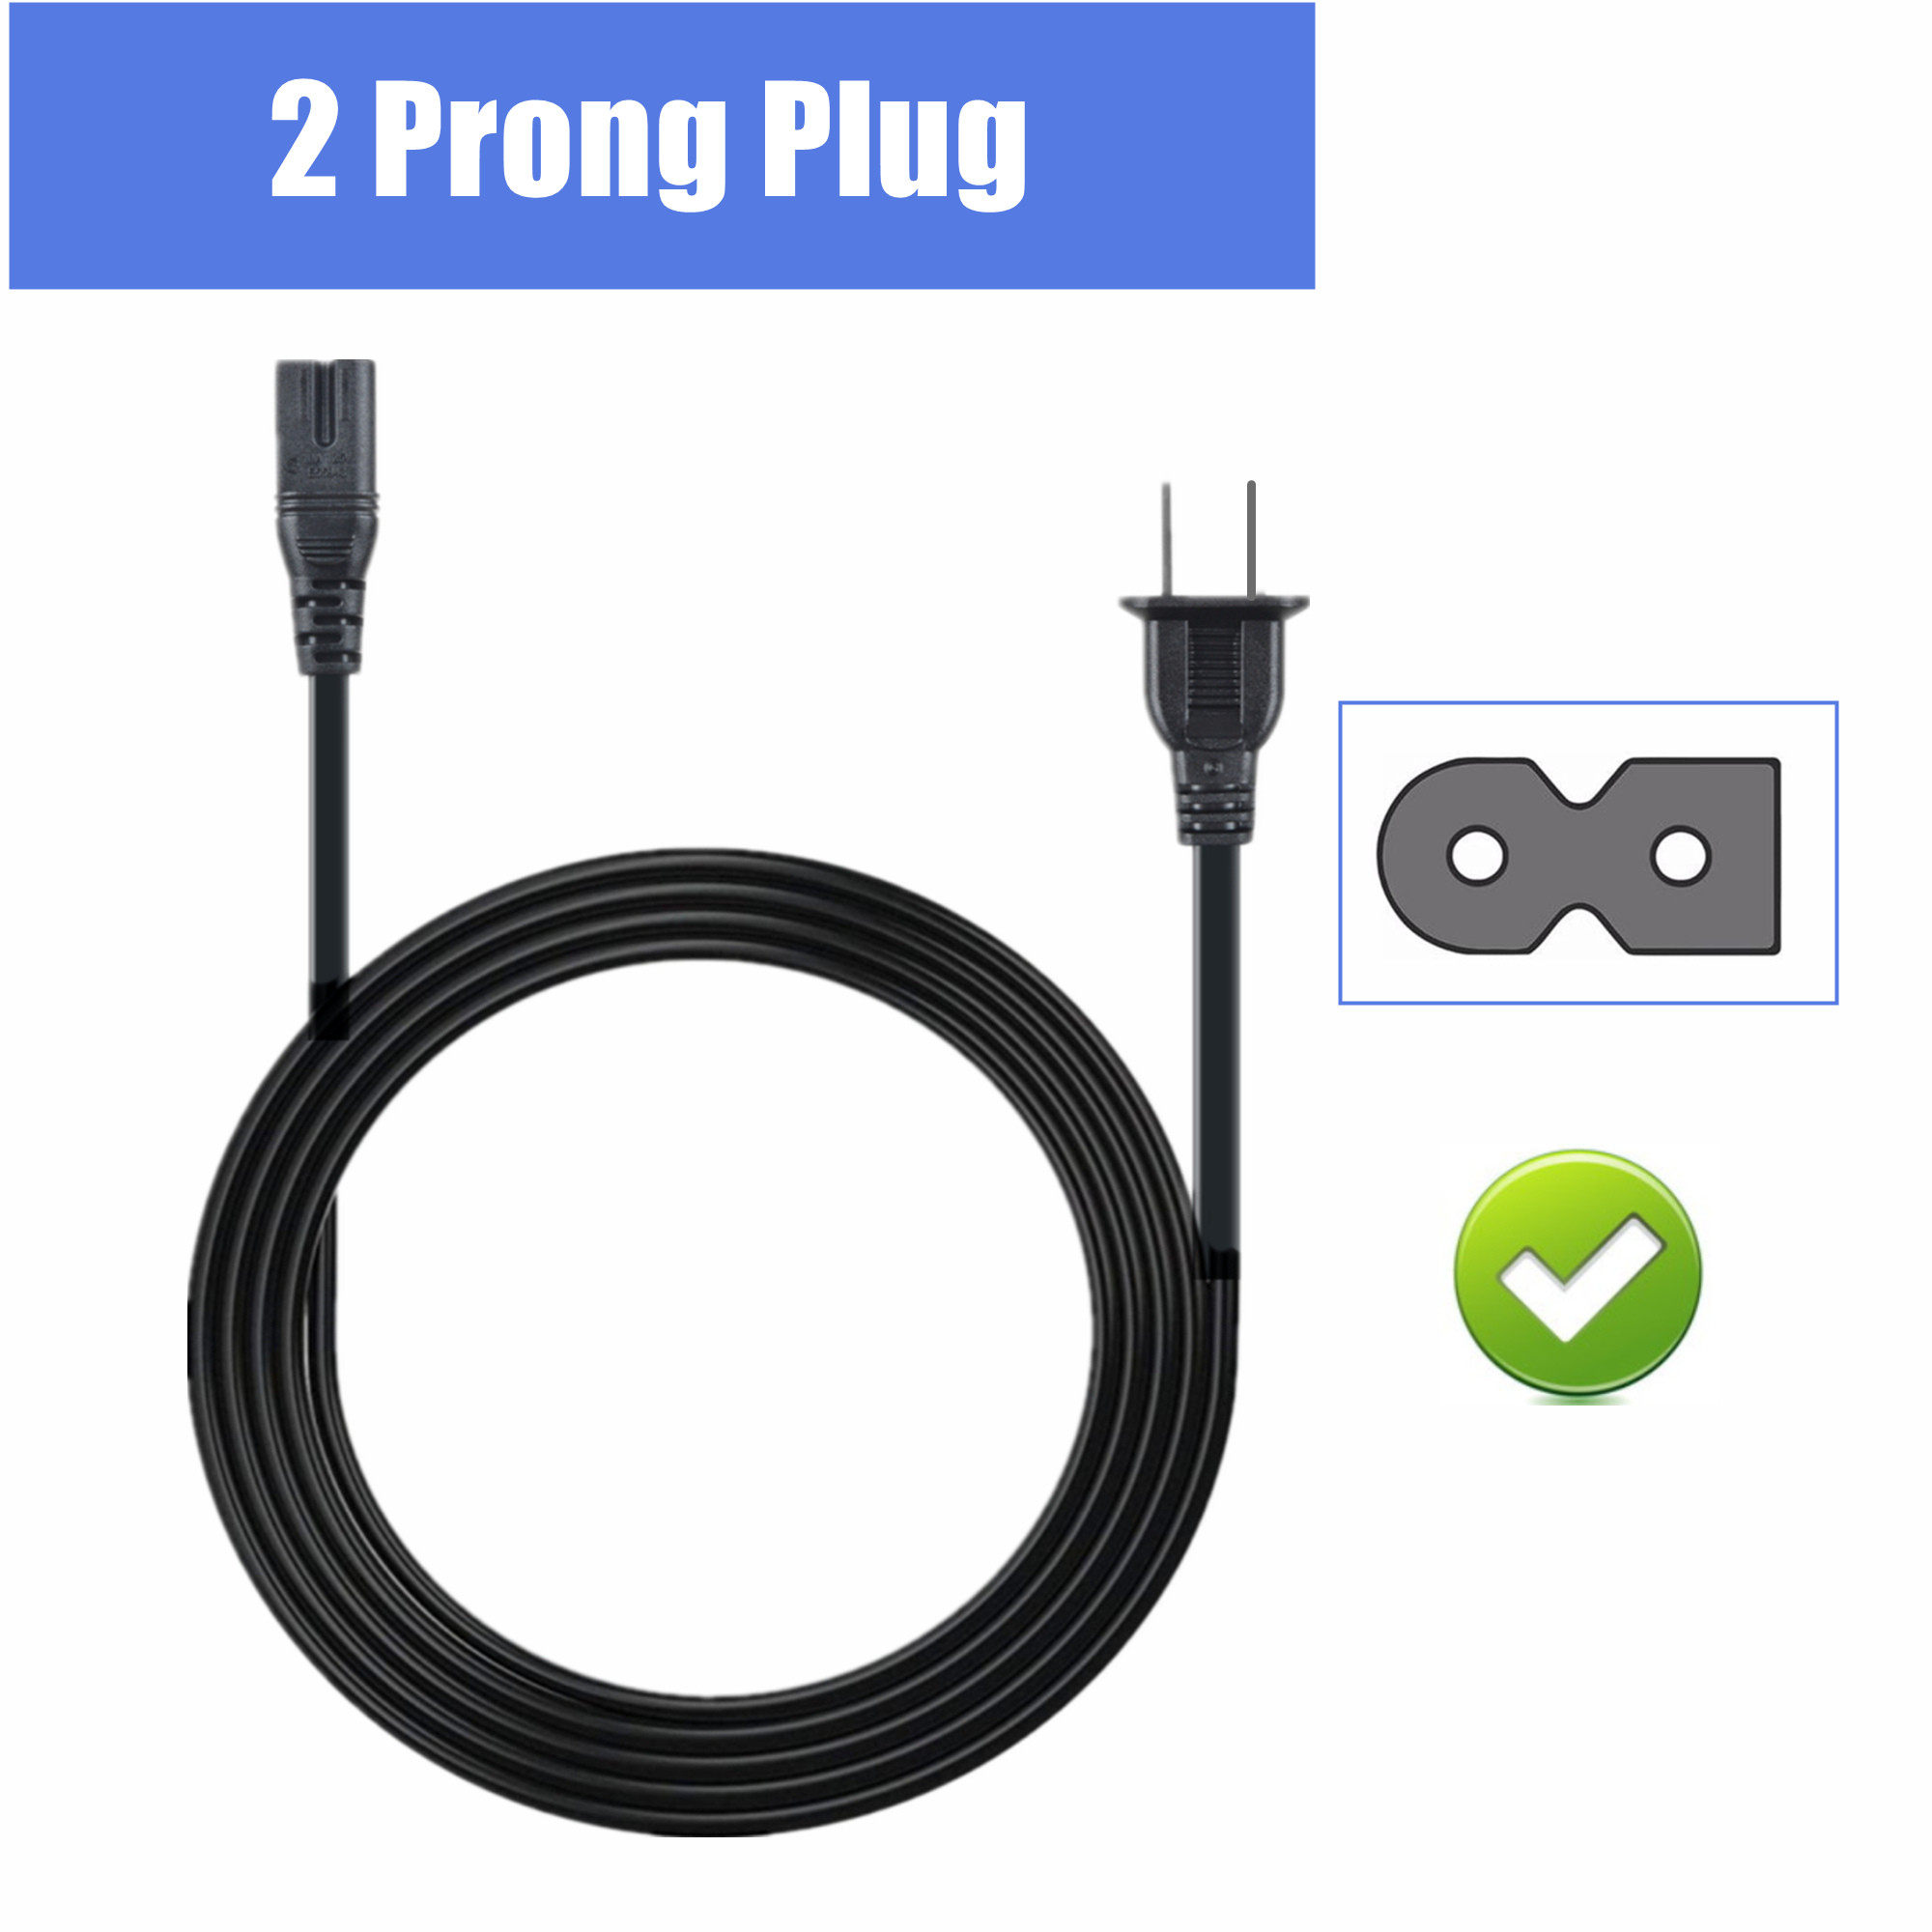 FITE ON 5ft AC Power Cord Outlet Socket Plug Cable Lead Replacement for the singing machine SML-383 SML-383P SML-383YP SML383YB Portable CD+G CDG Karaoke Player Machine - image 2 of 4